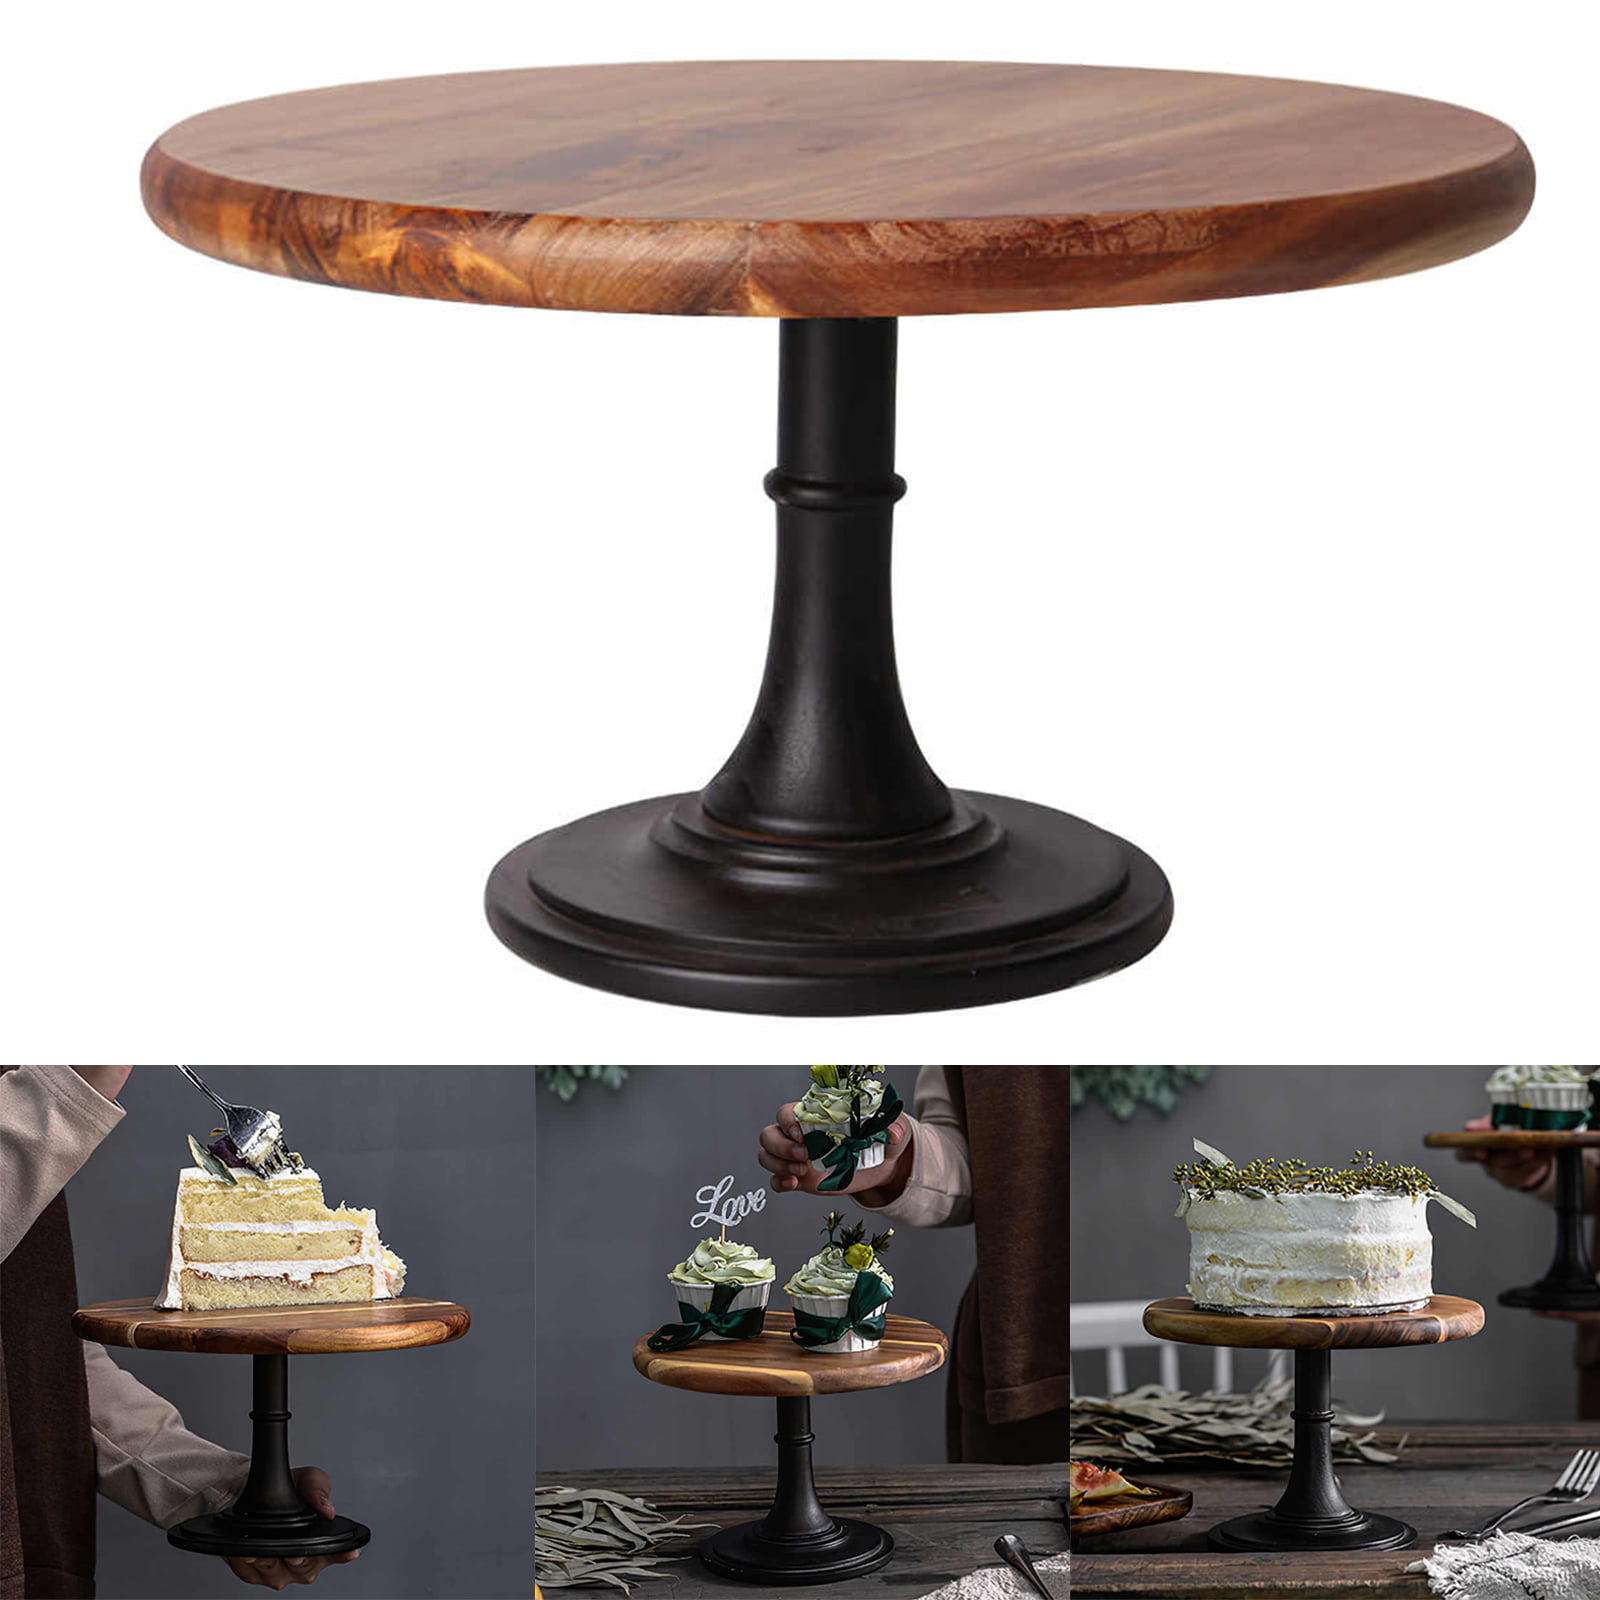 Details about   Rustic Wood Cake Stand Pedestal Dessert Display Holder Plate Party Birthday 